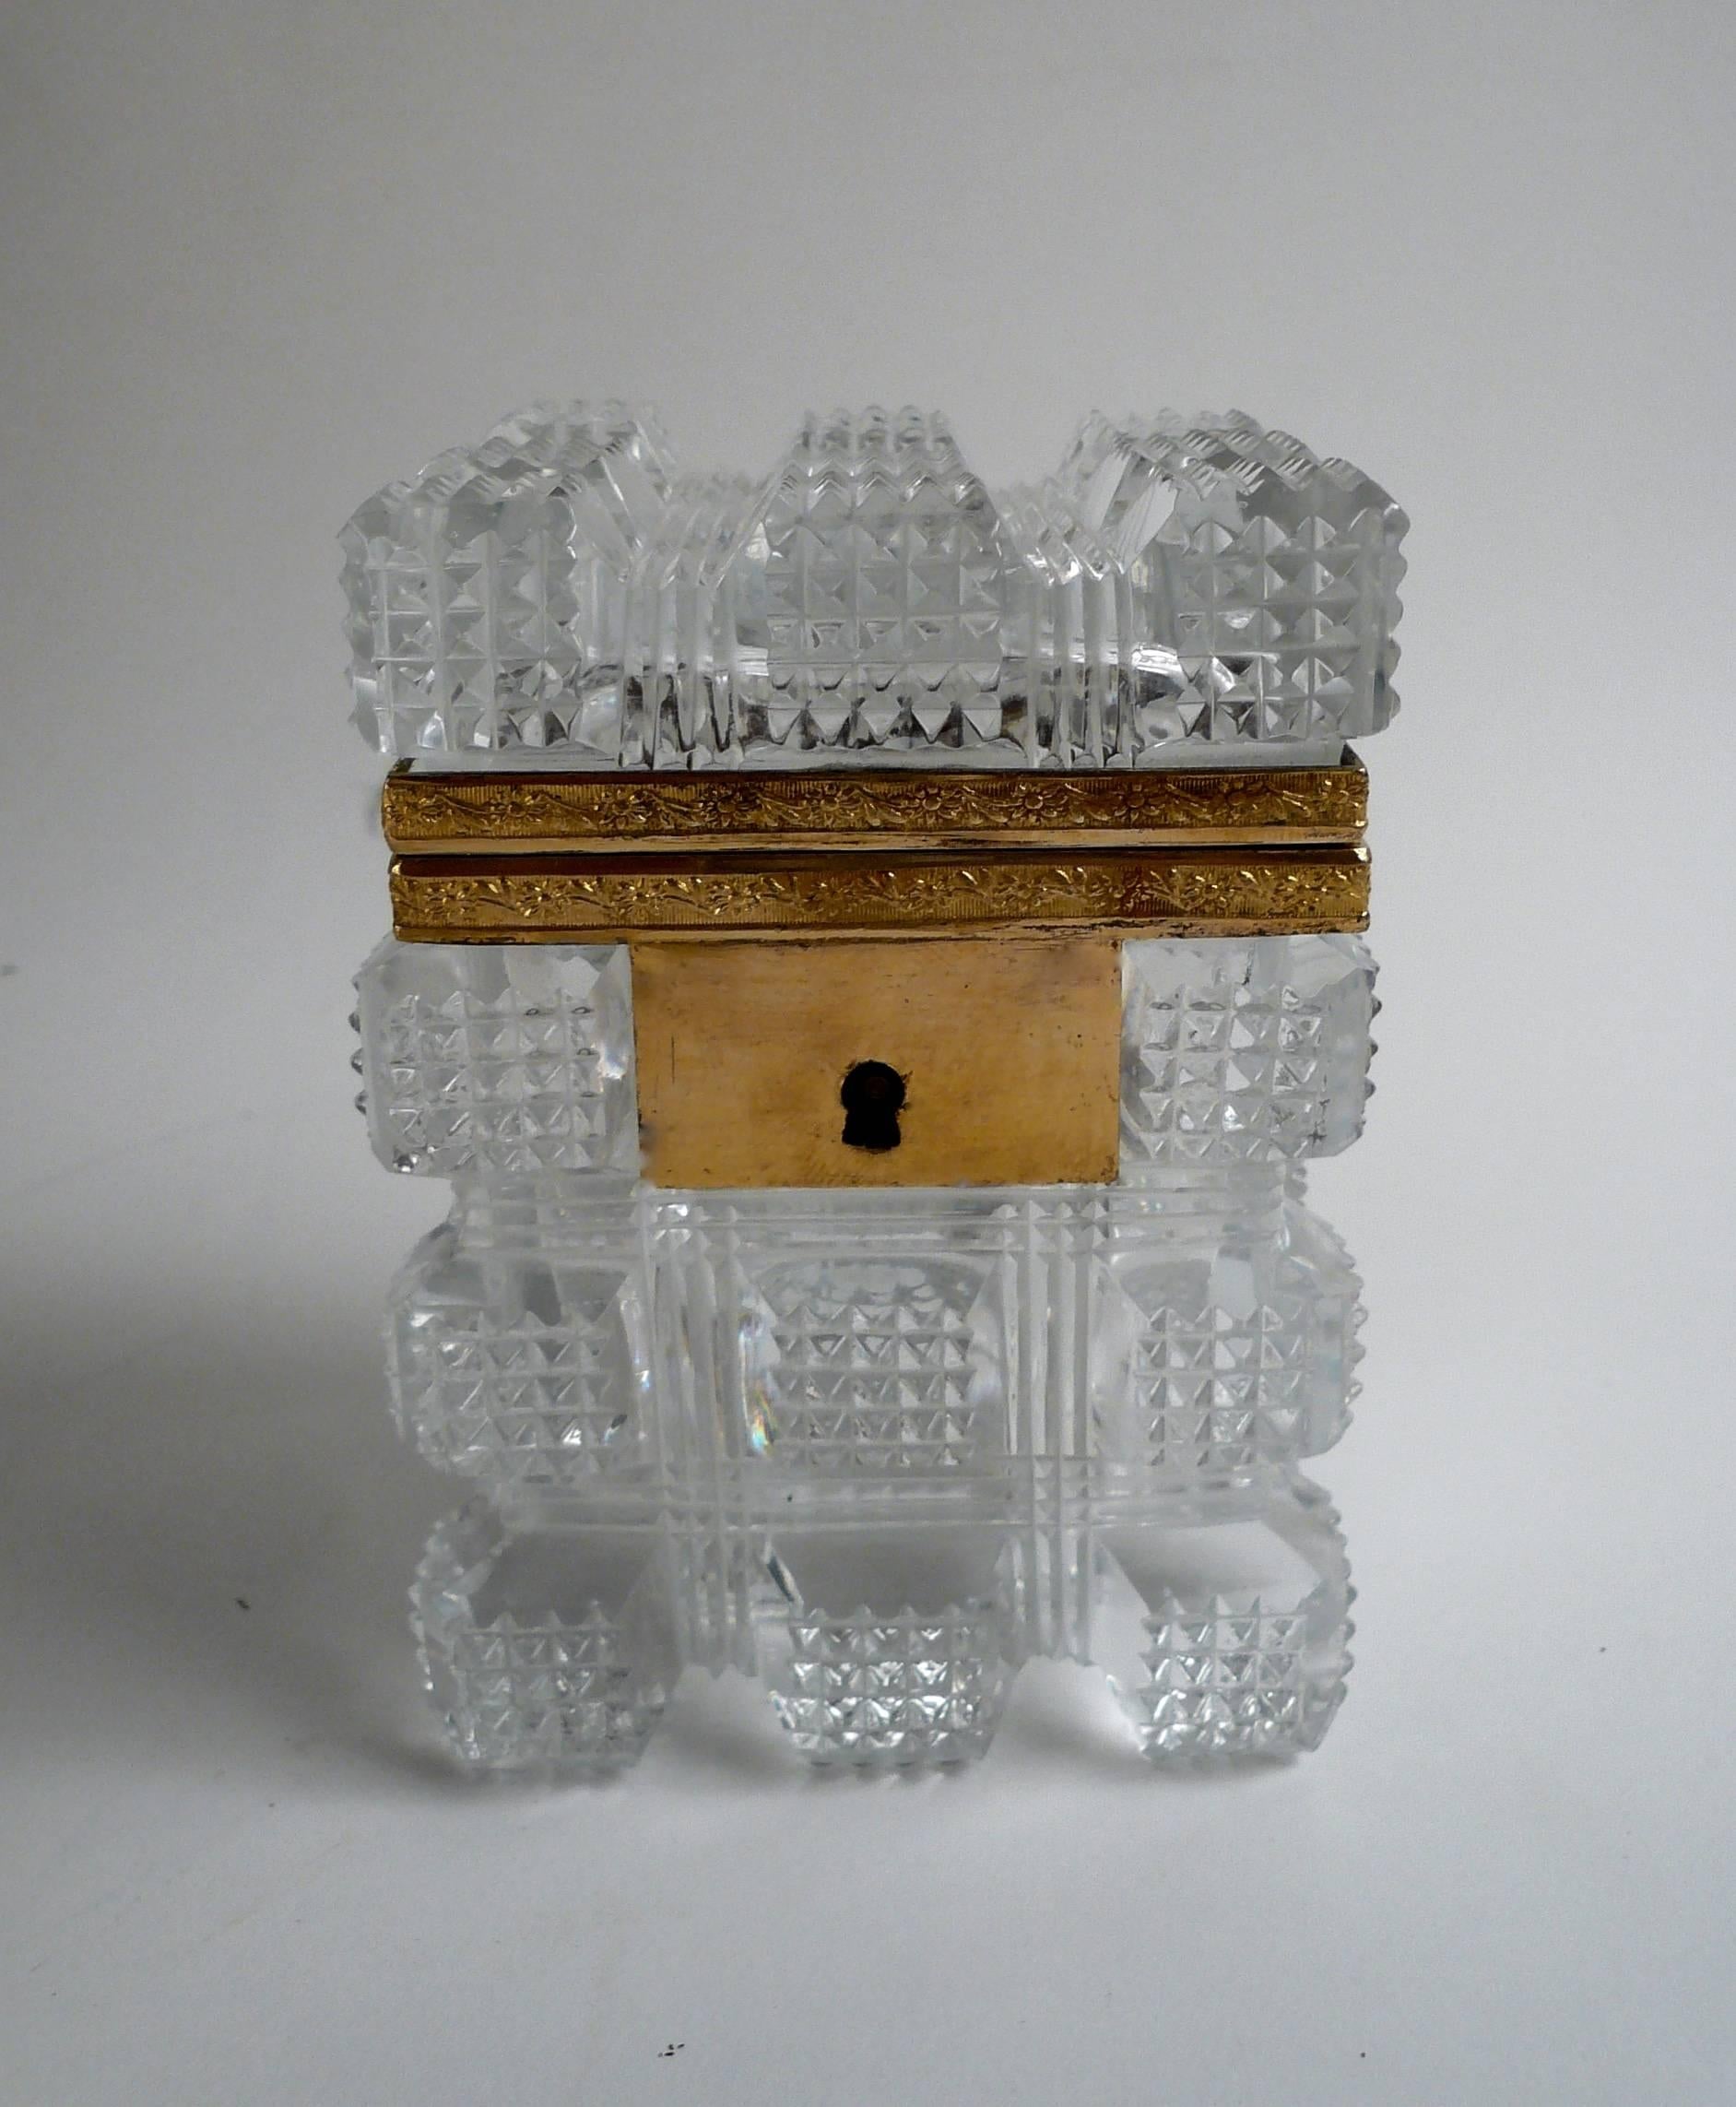 This cut crystal and gilt bronze box is beautifully hand cut, and in excellent condition.